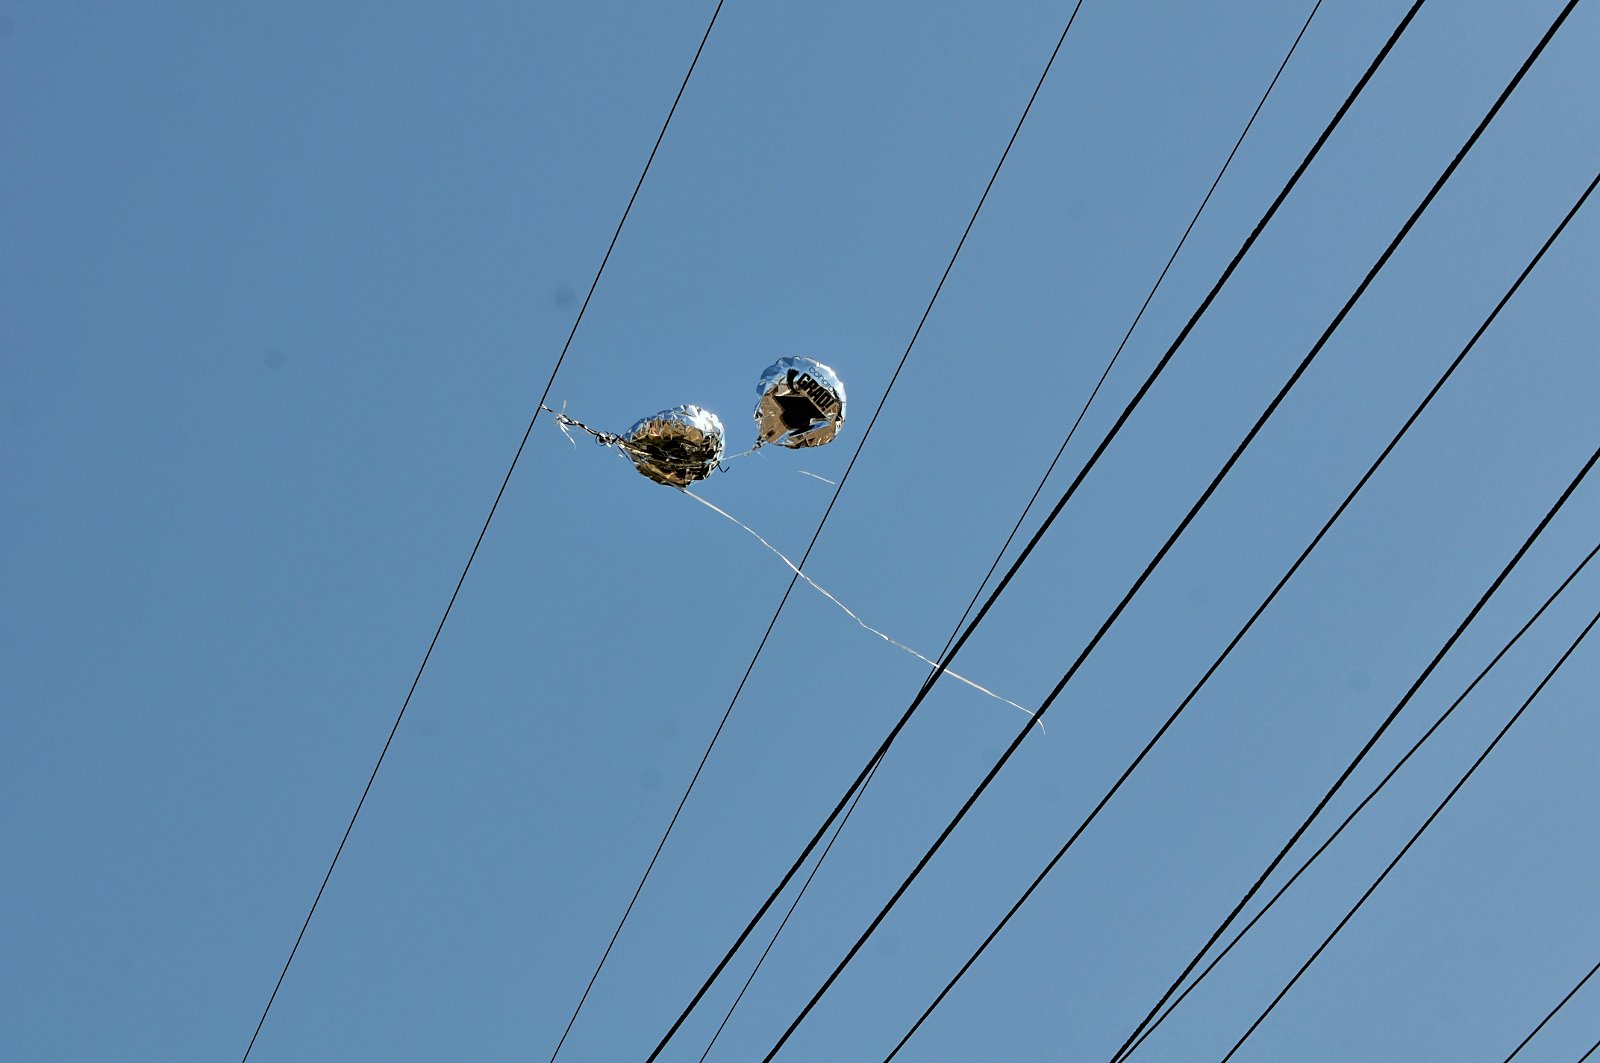 Balloons caught on power lines | Credit: D Coetzee on Flickr | License: CC0